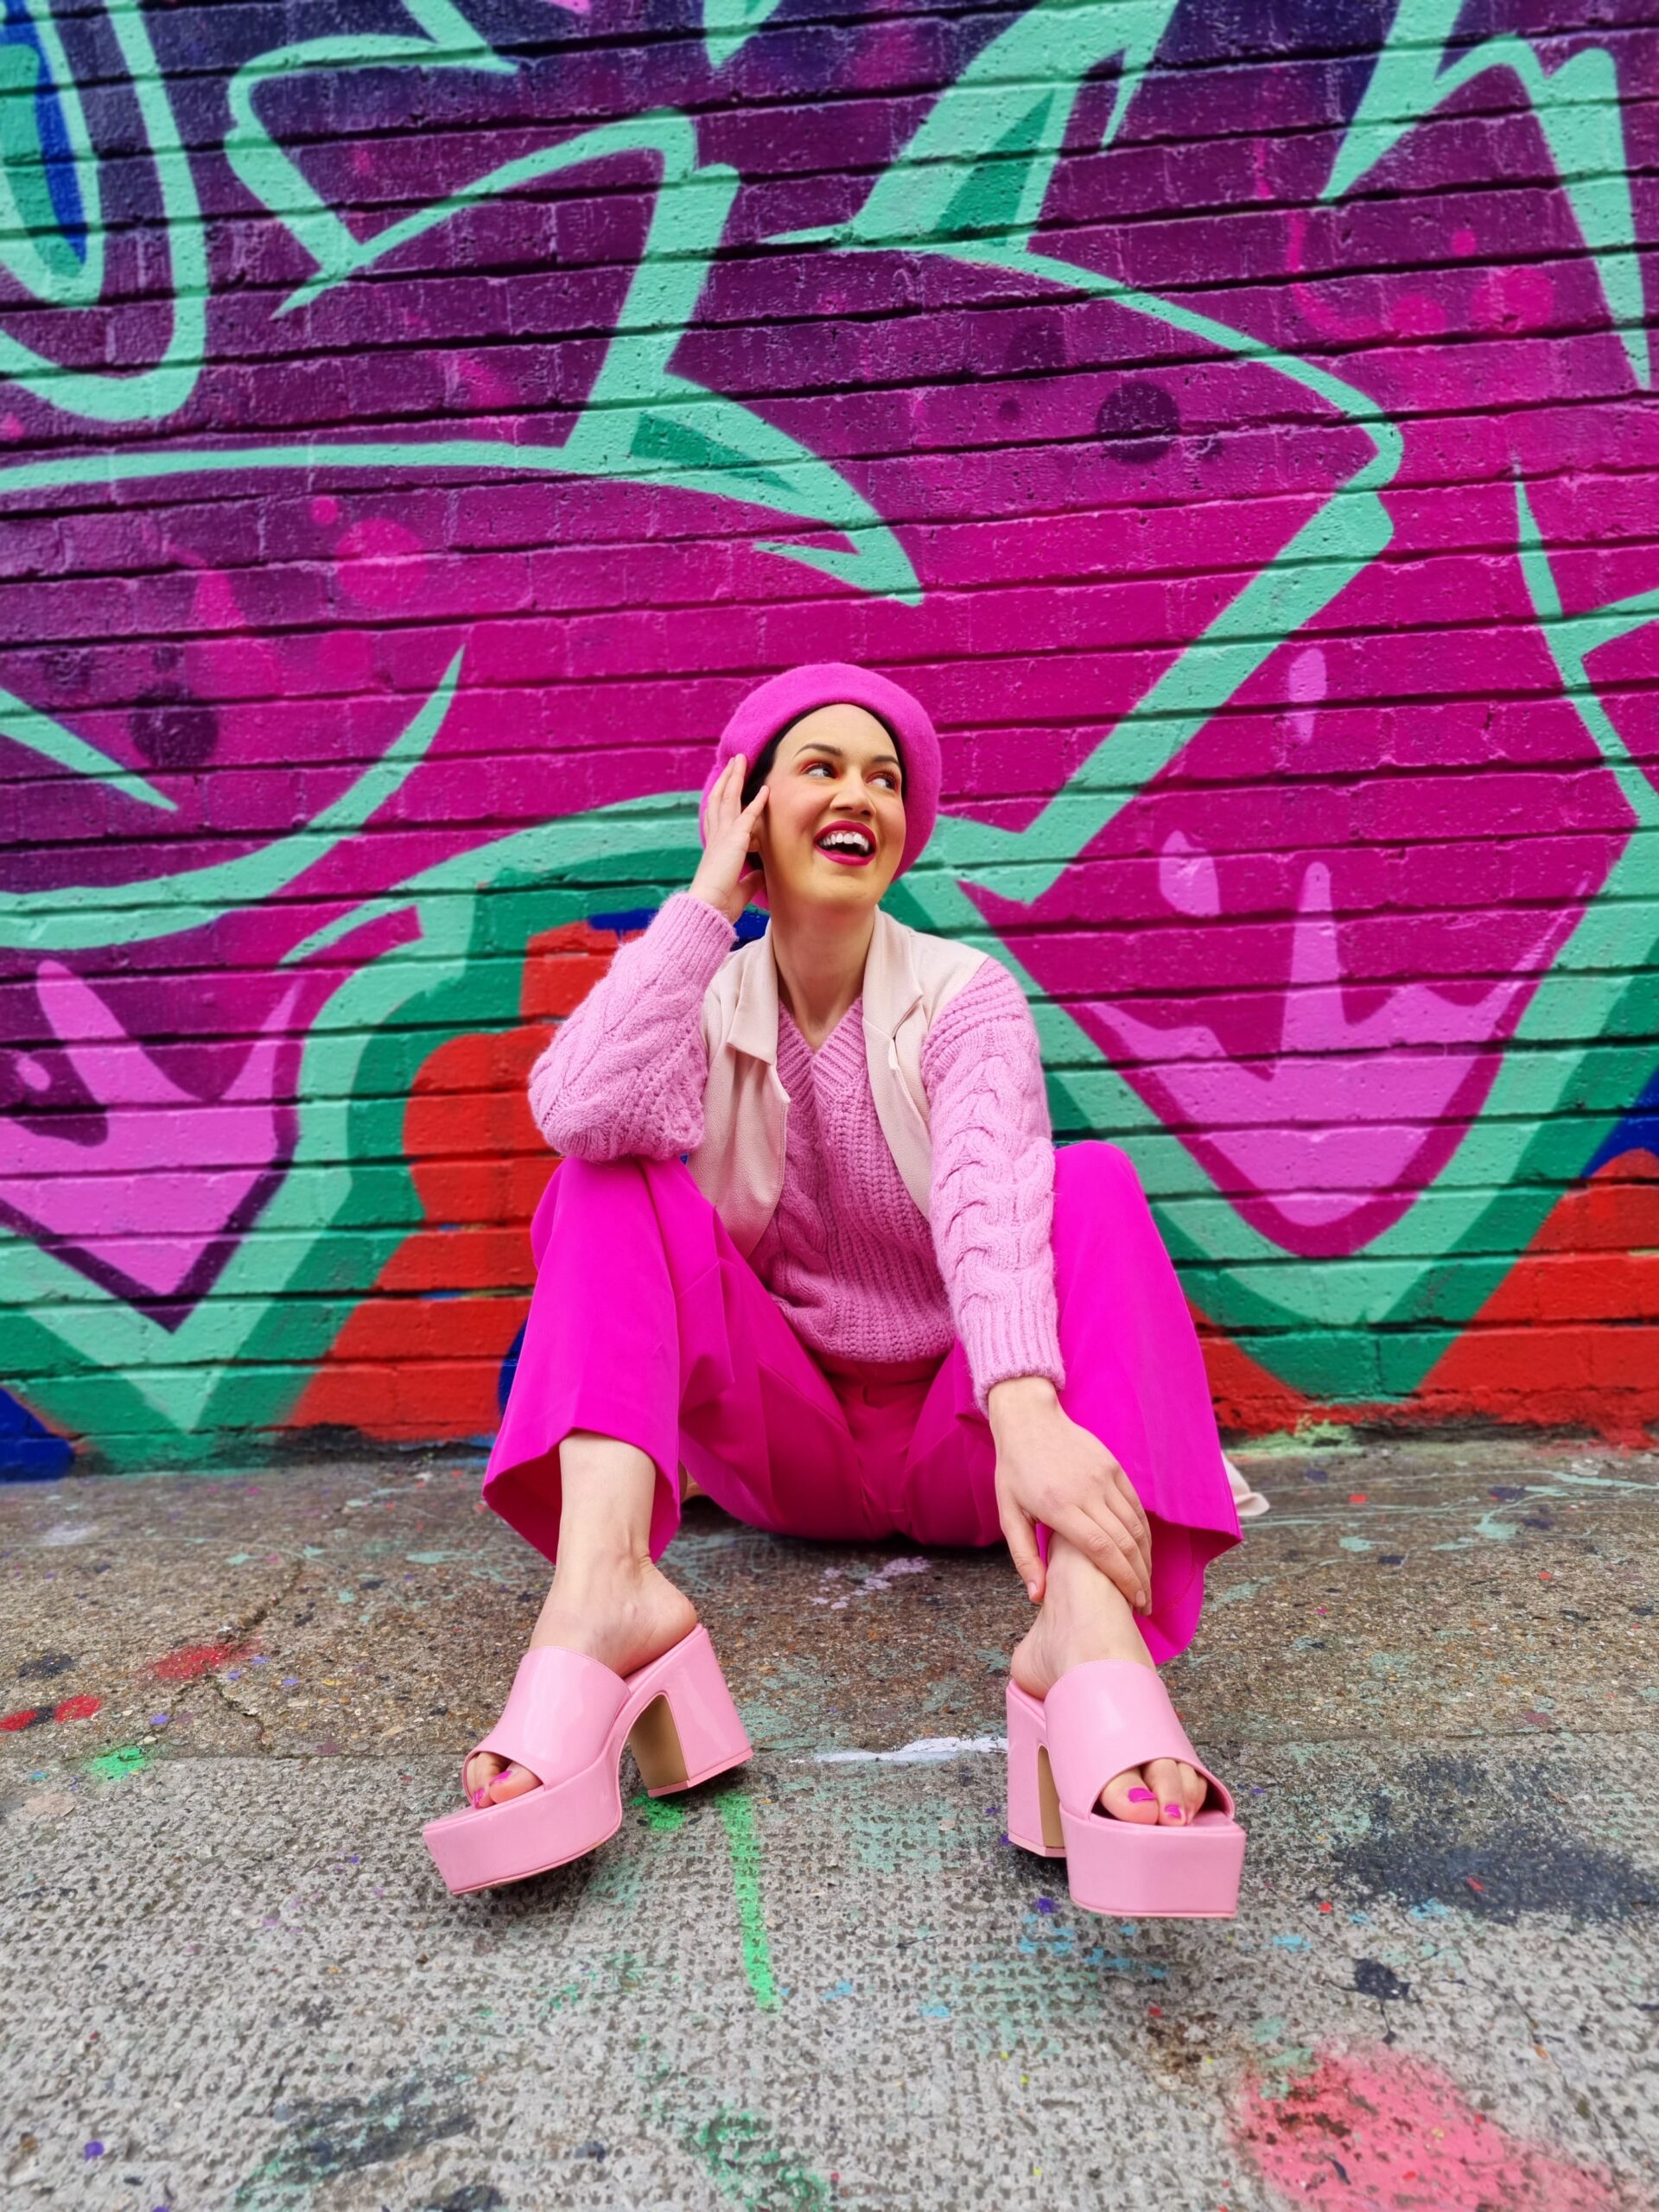 <img src="ana.jpg" alt="ana smiling in pink jumper and trousers"/>